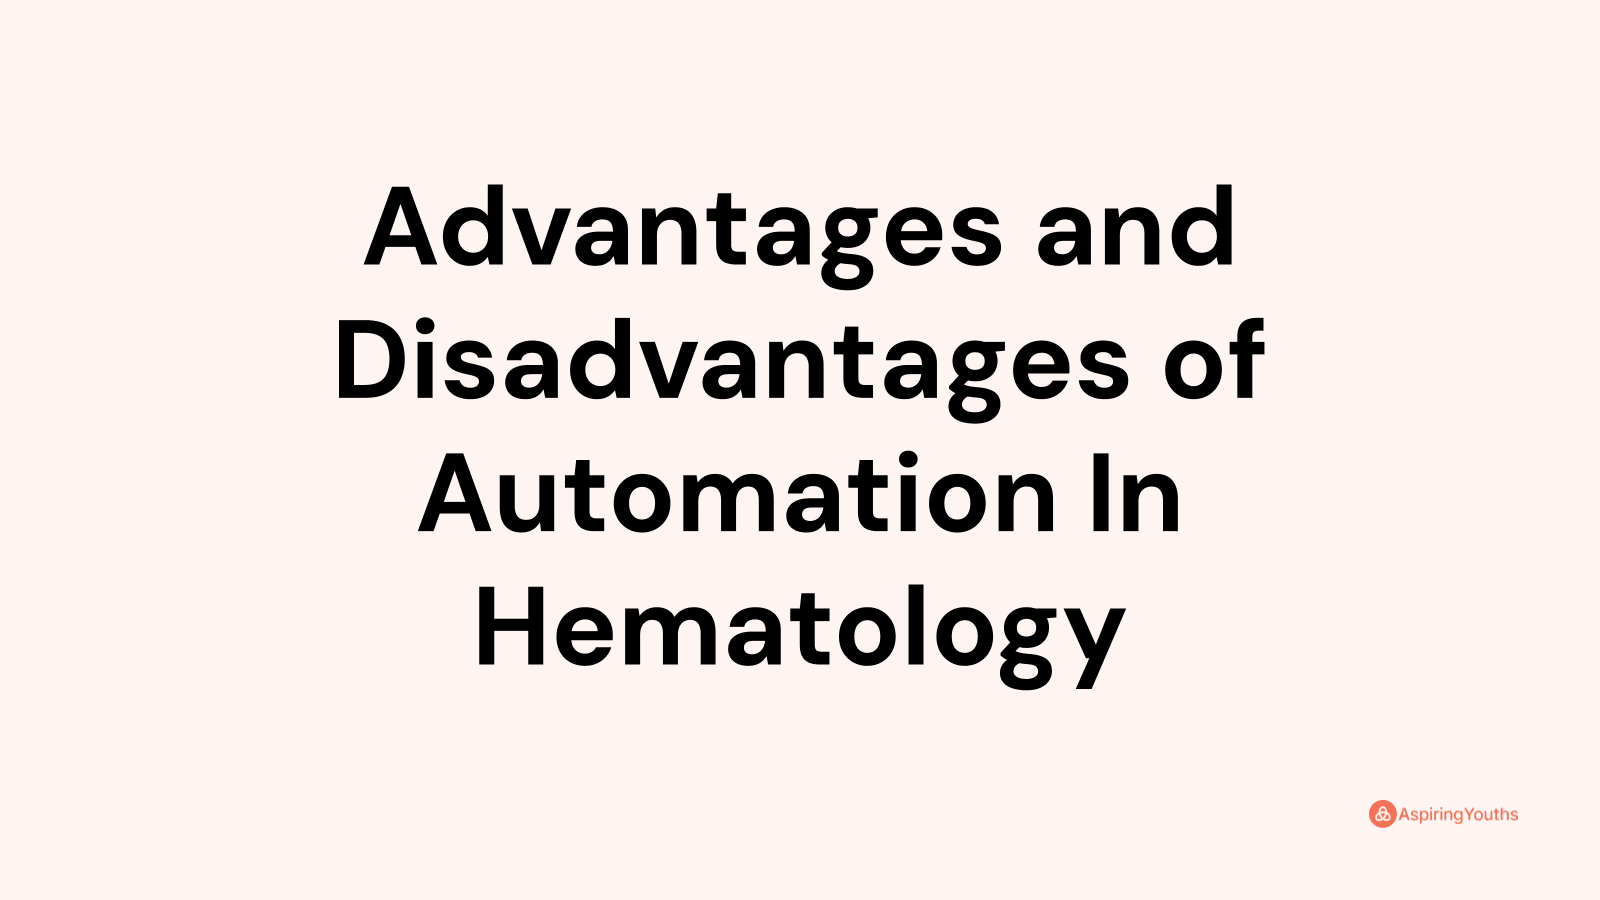 Advantages and disadvantages of Automation In Hematology